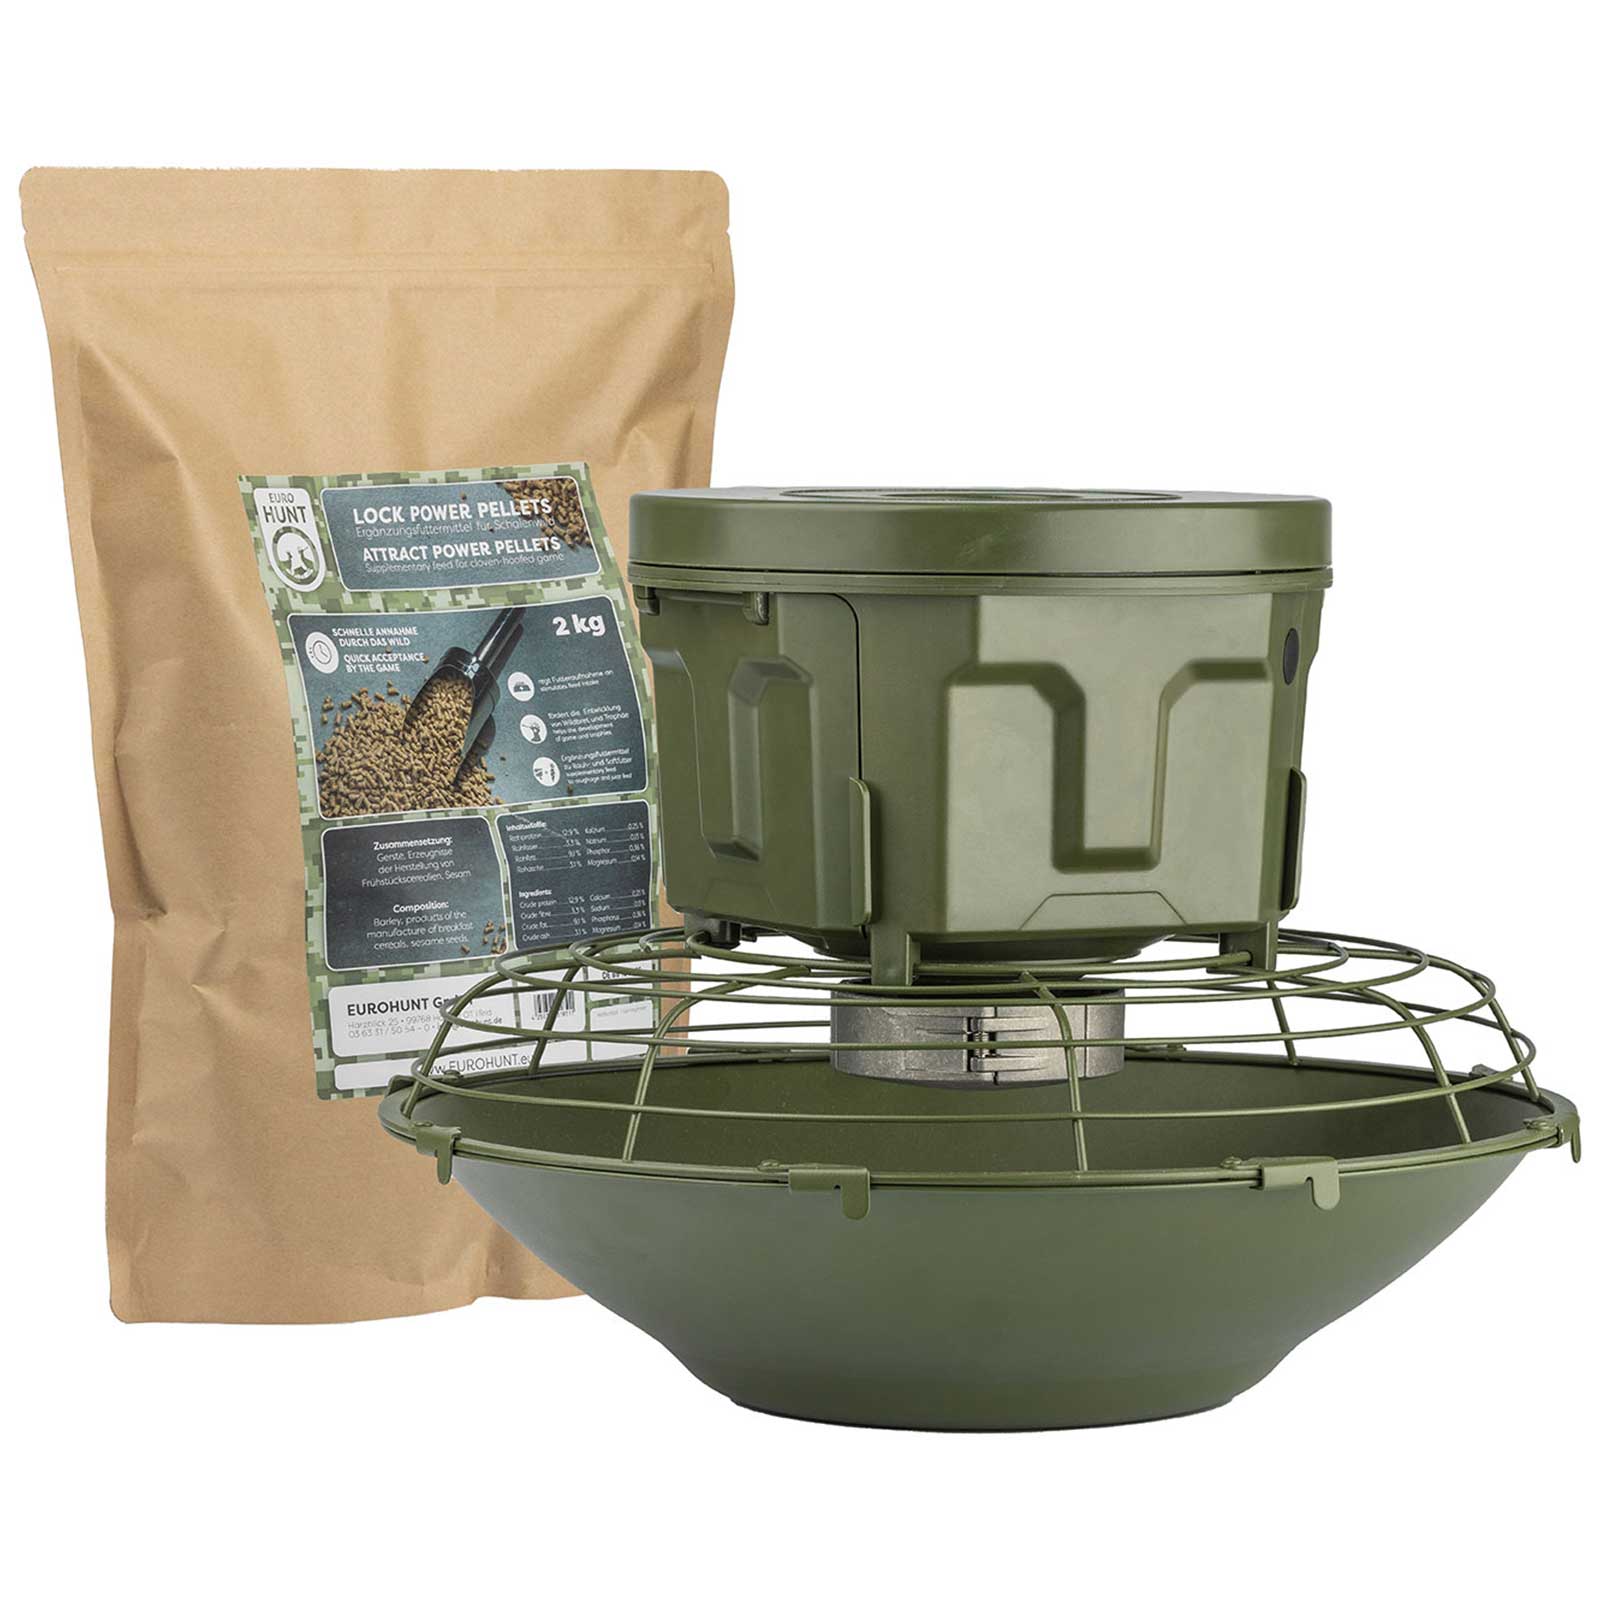 Eurohunt Automatic Feeder Evolution With Power Lock Pellets 2 Kg Sack